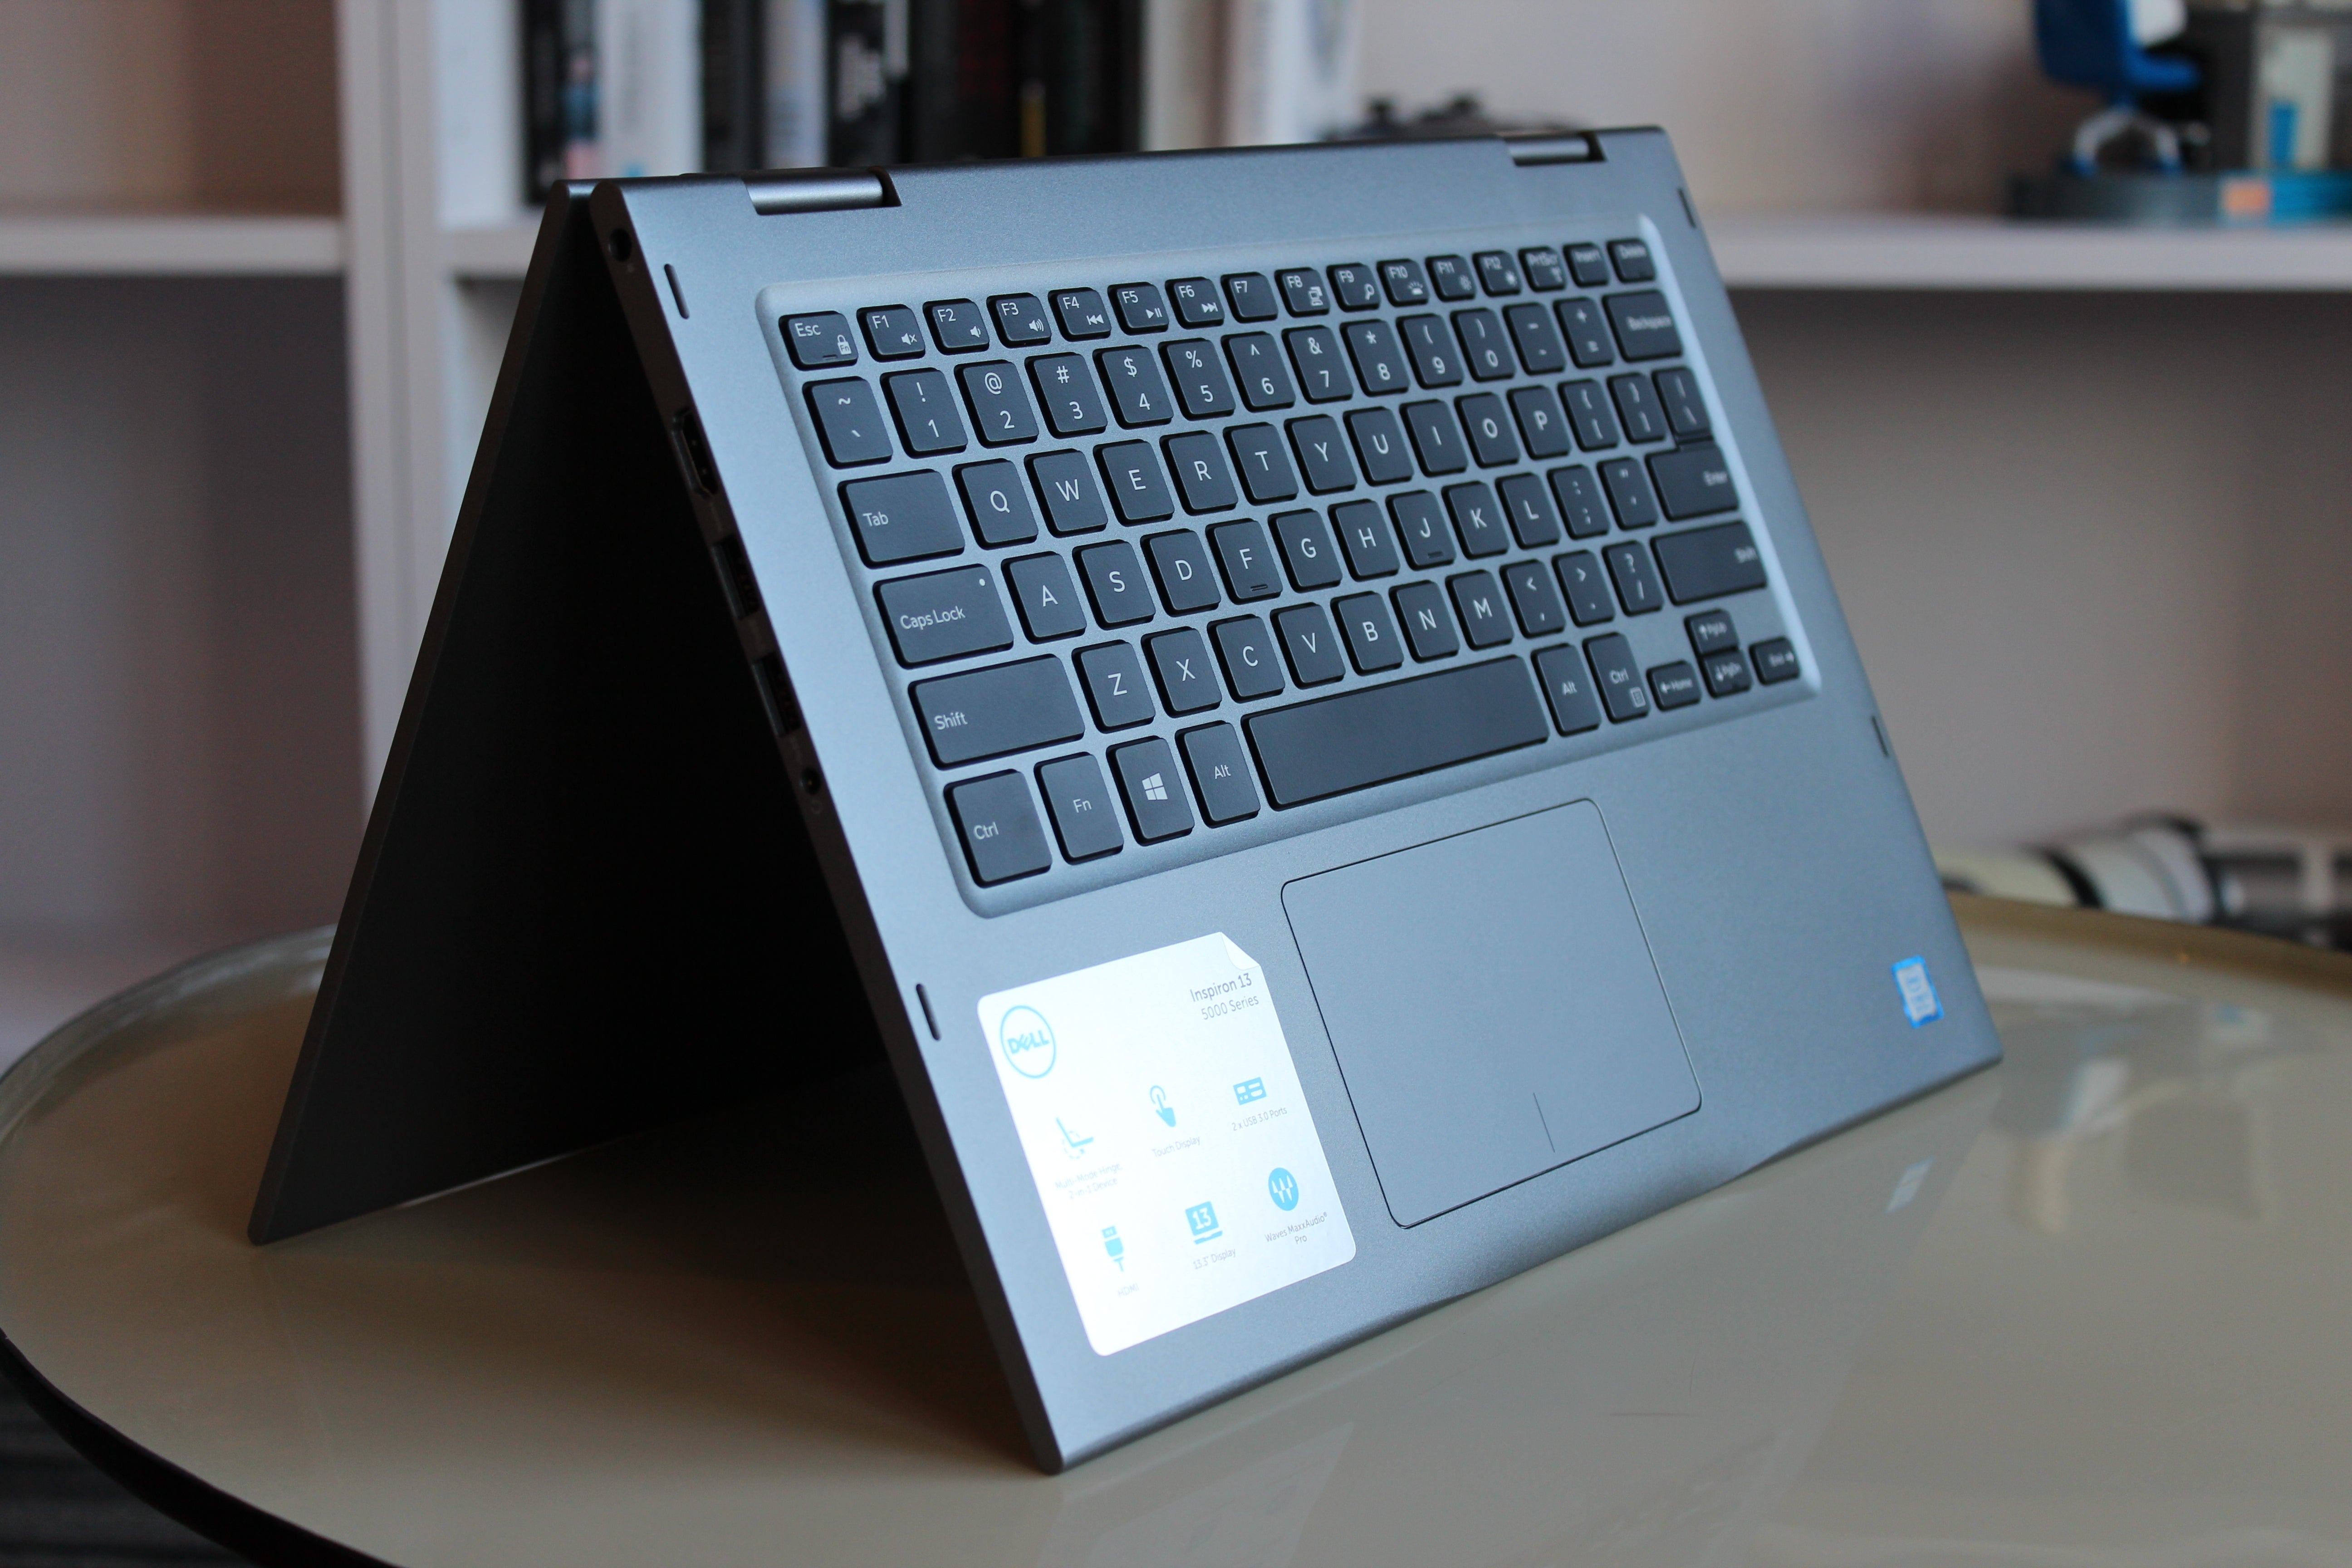 Dell Inspiron 13 5000 review: A speedy 2-in-1 ultrabook ...